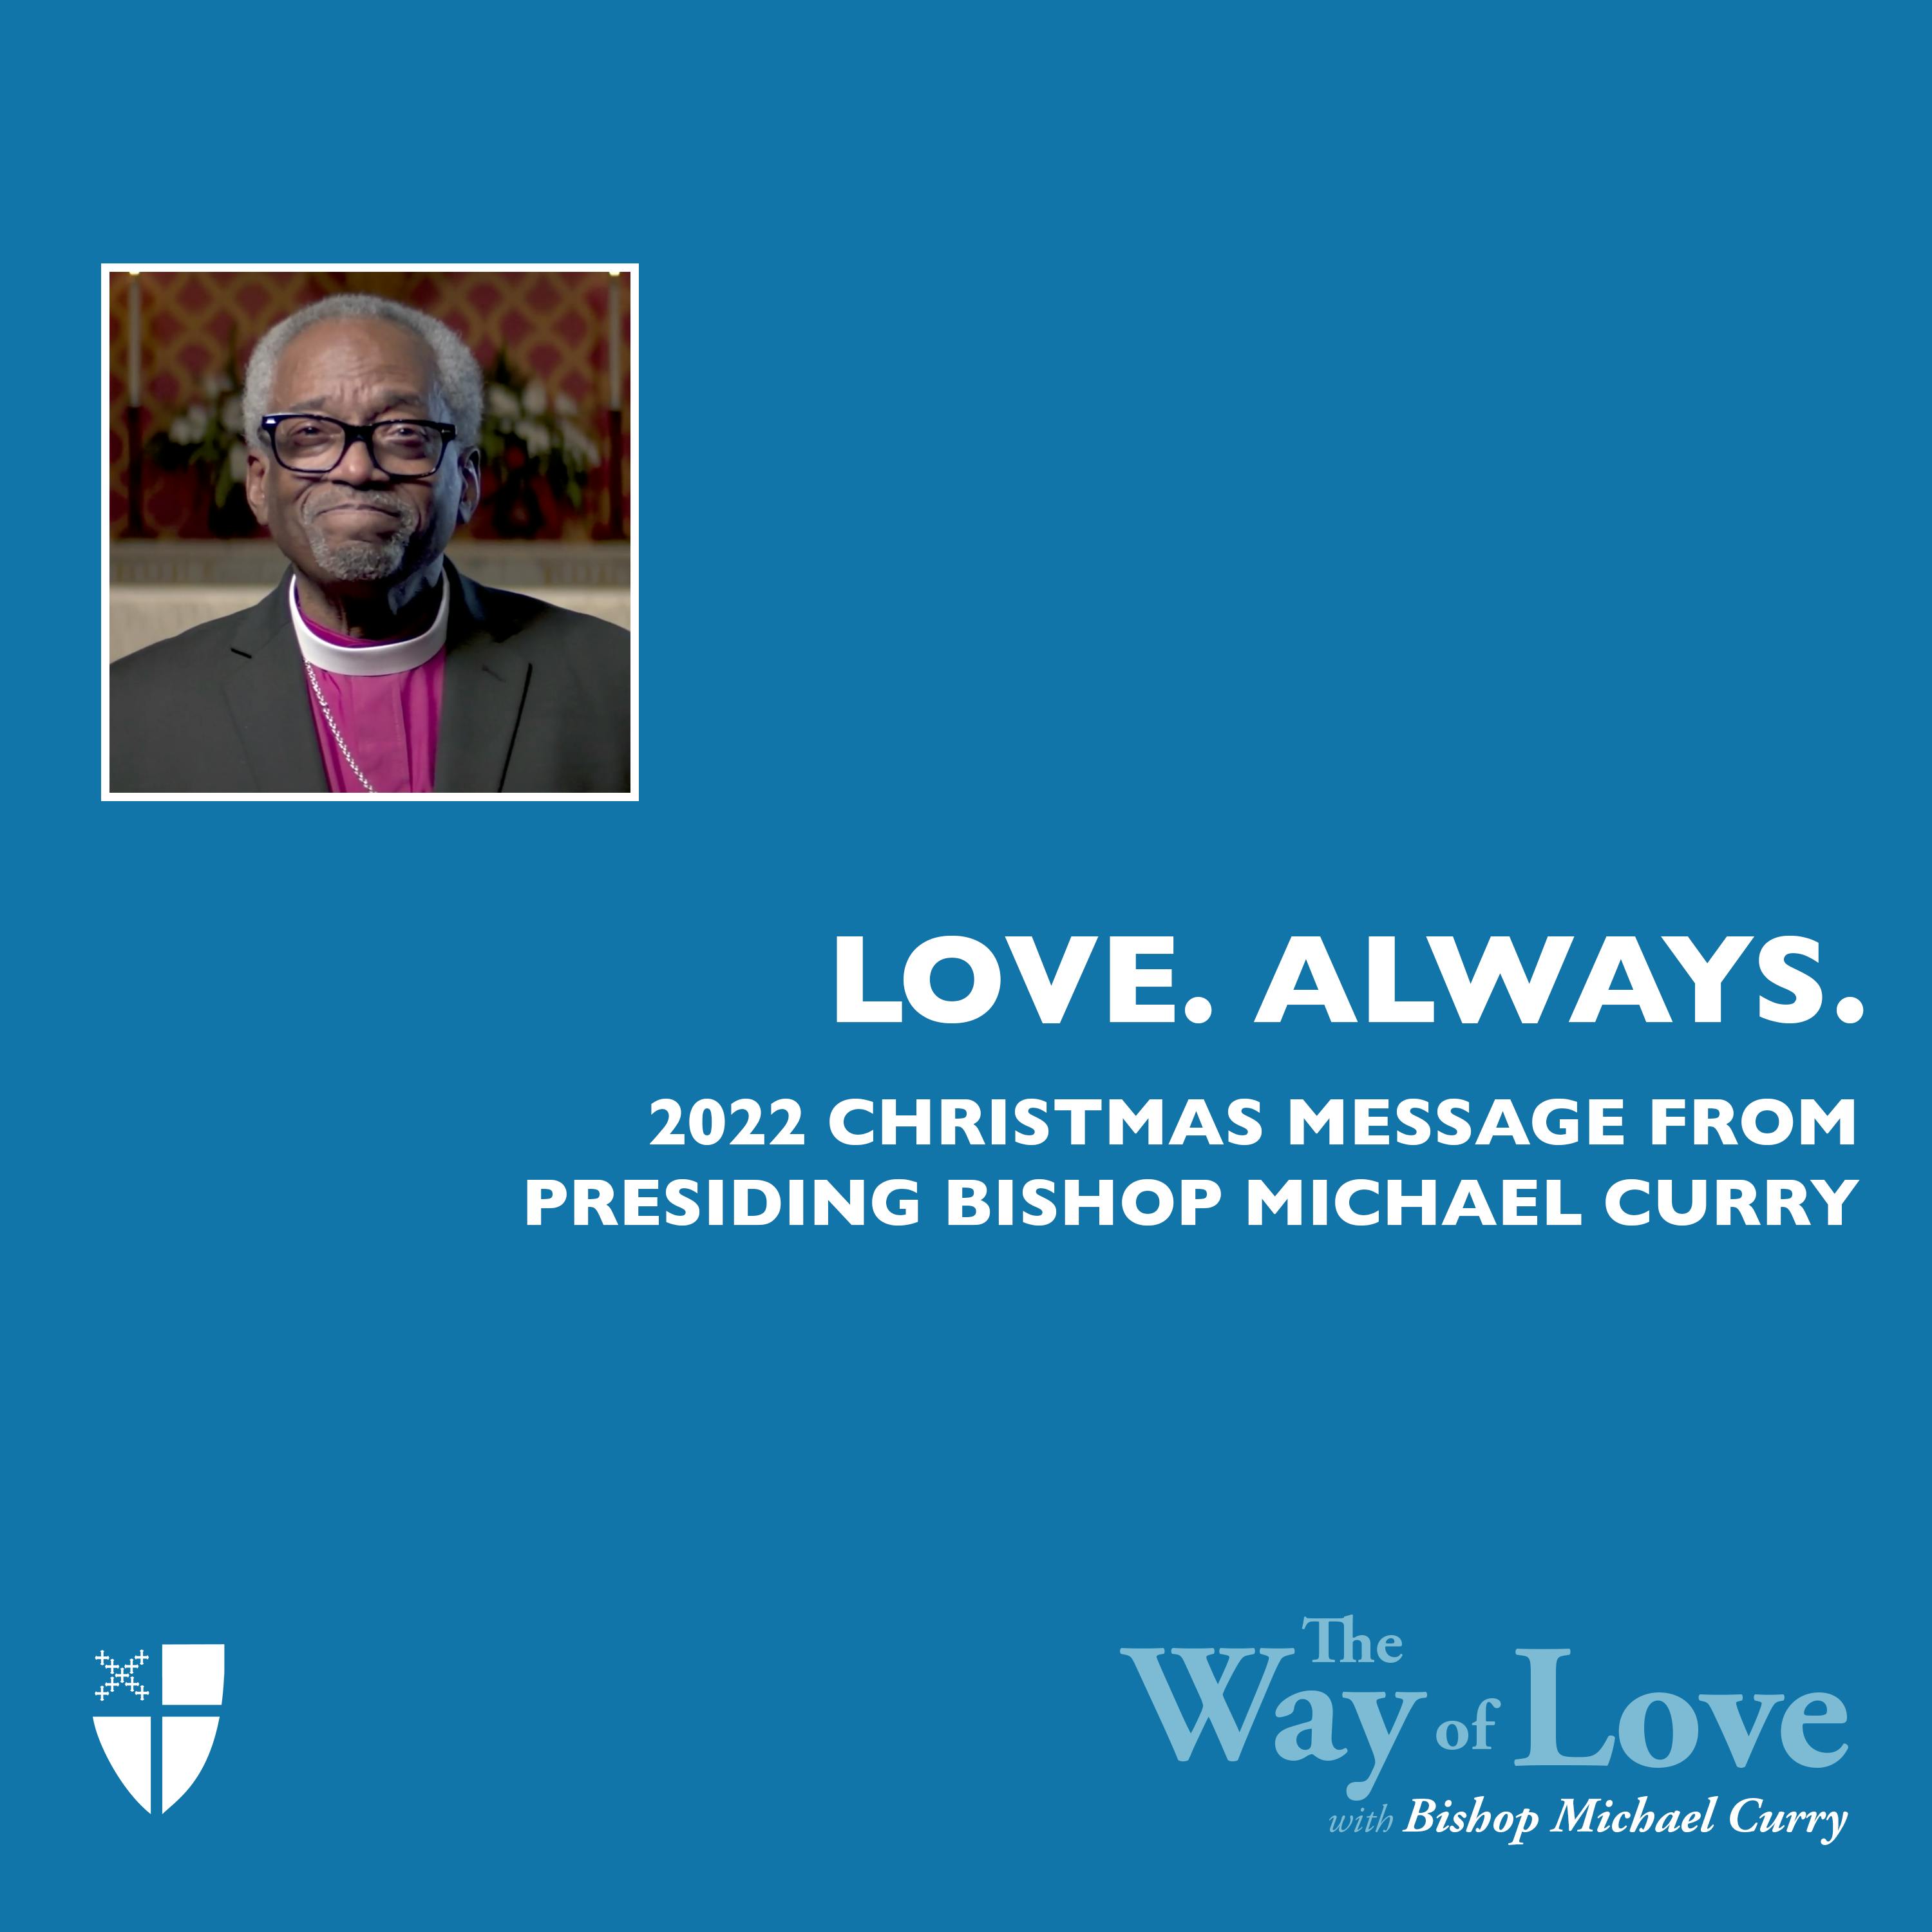 Special Episode: Love. Always. - Presiding Bishop Michael Curry's 2022 Christmas Message